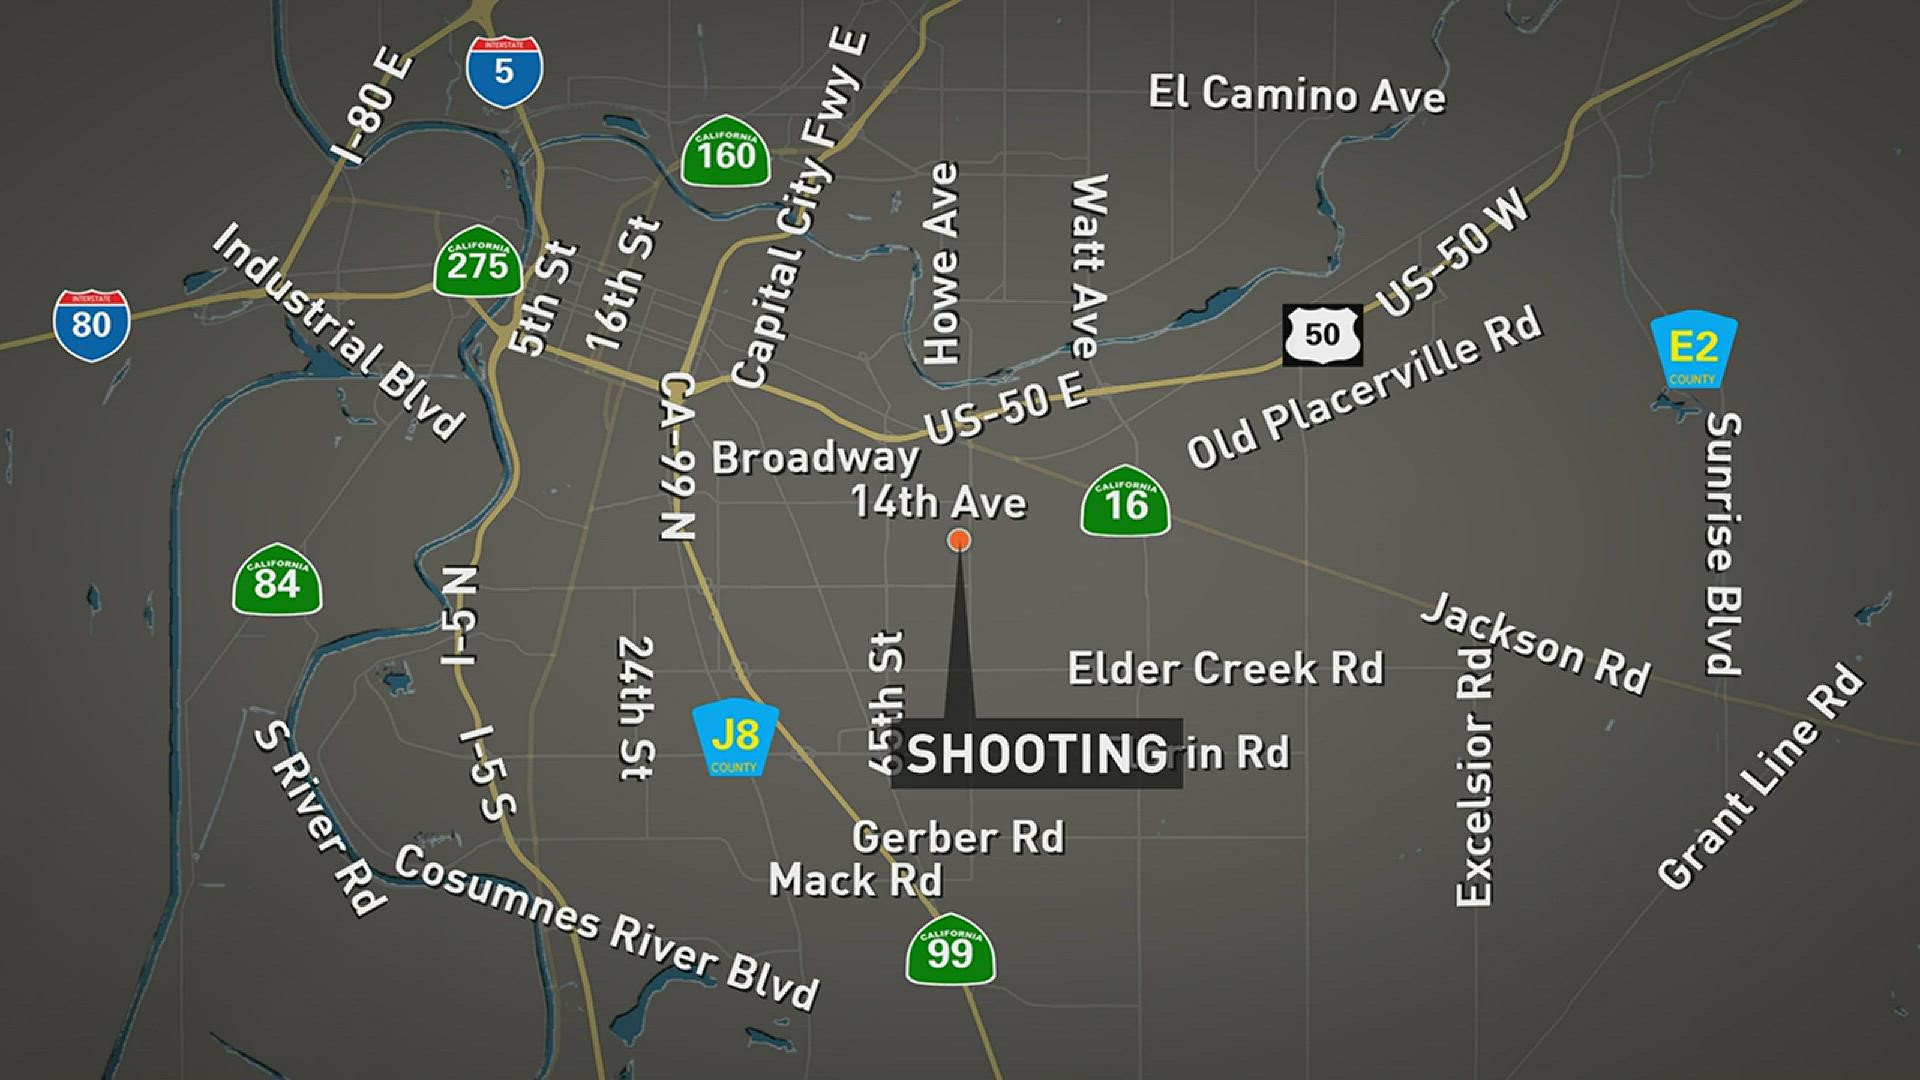 A pregnant woman and 5-year-old child were injured in a shooting in Sacramento on Sunday, according to the Sacramento Police Department.